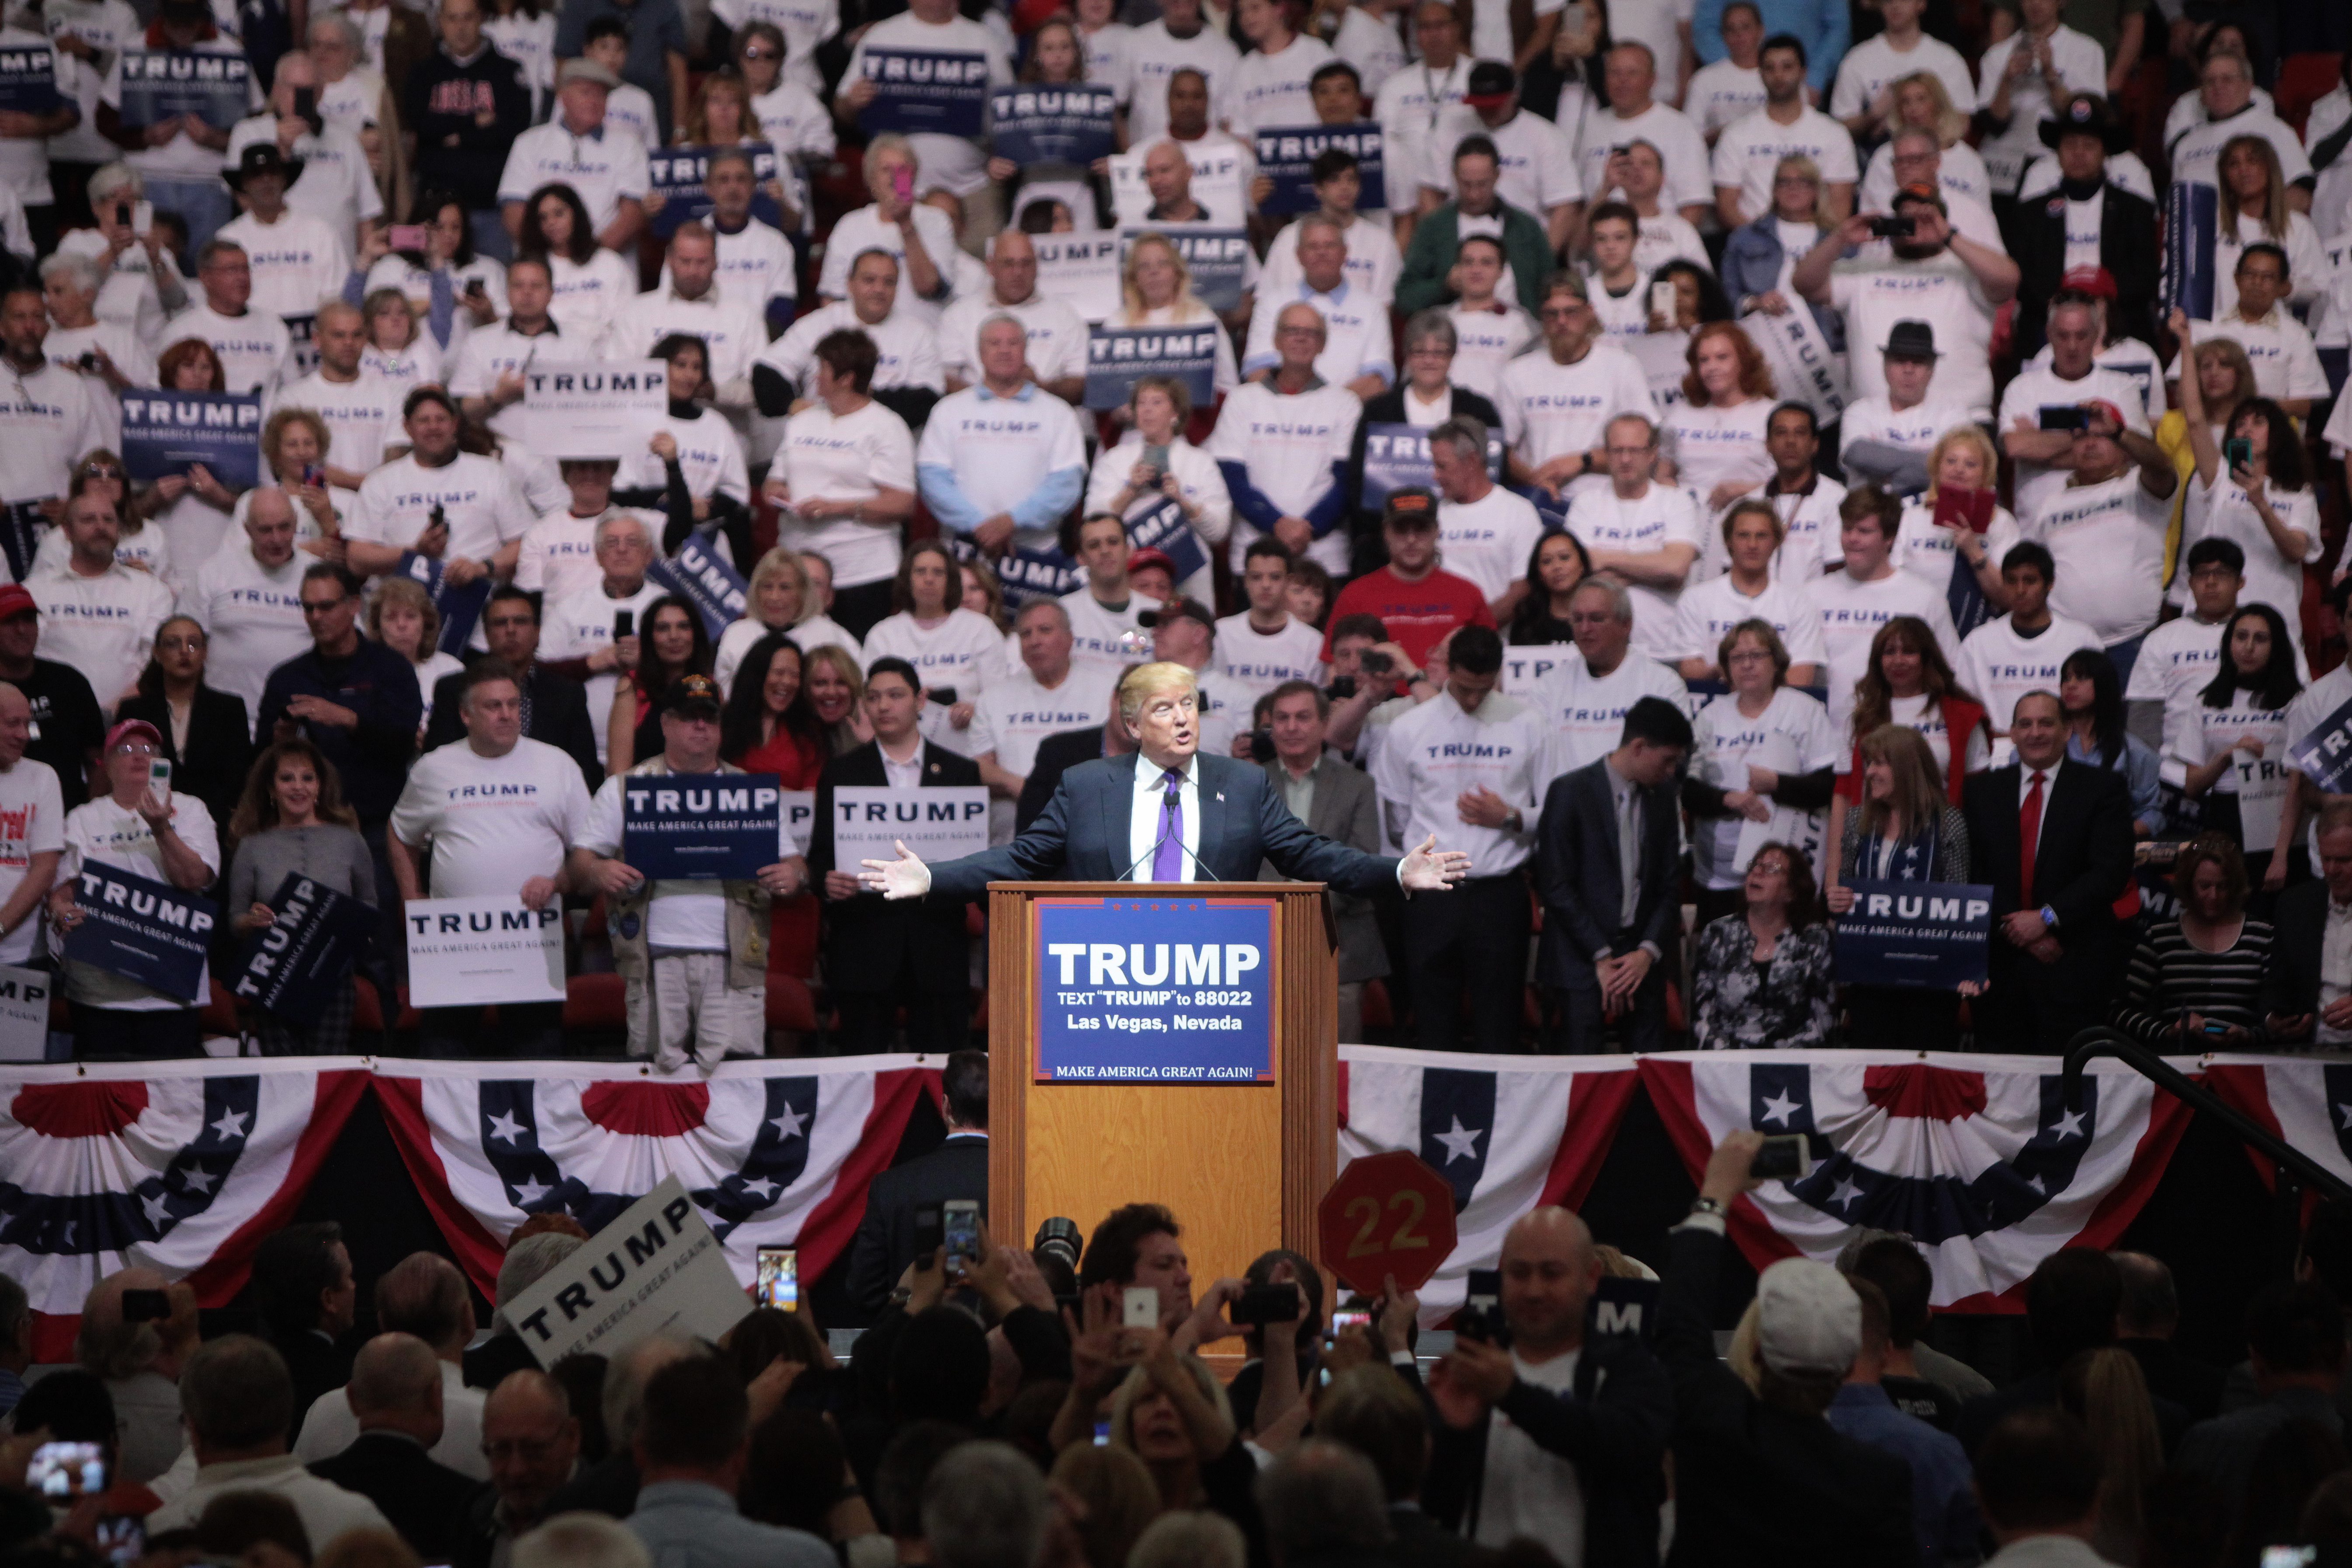 Donald Trump speaking with supporters at a campaign rally at the South Point Arena in Las Vegas, Nevada. Gage Skidmore/Wikimedia Commons.